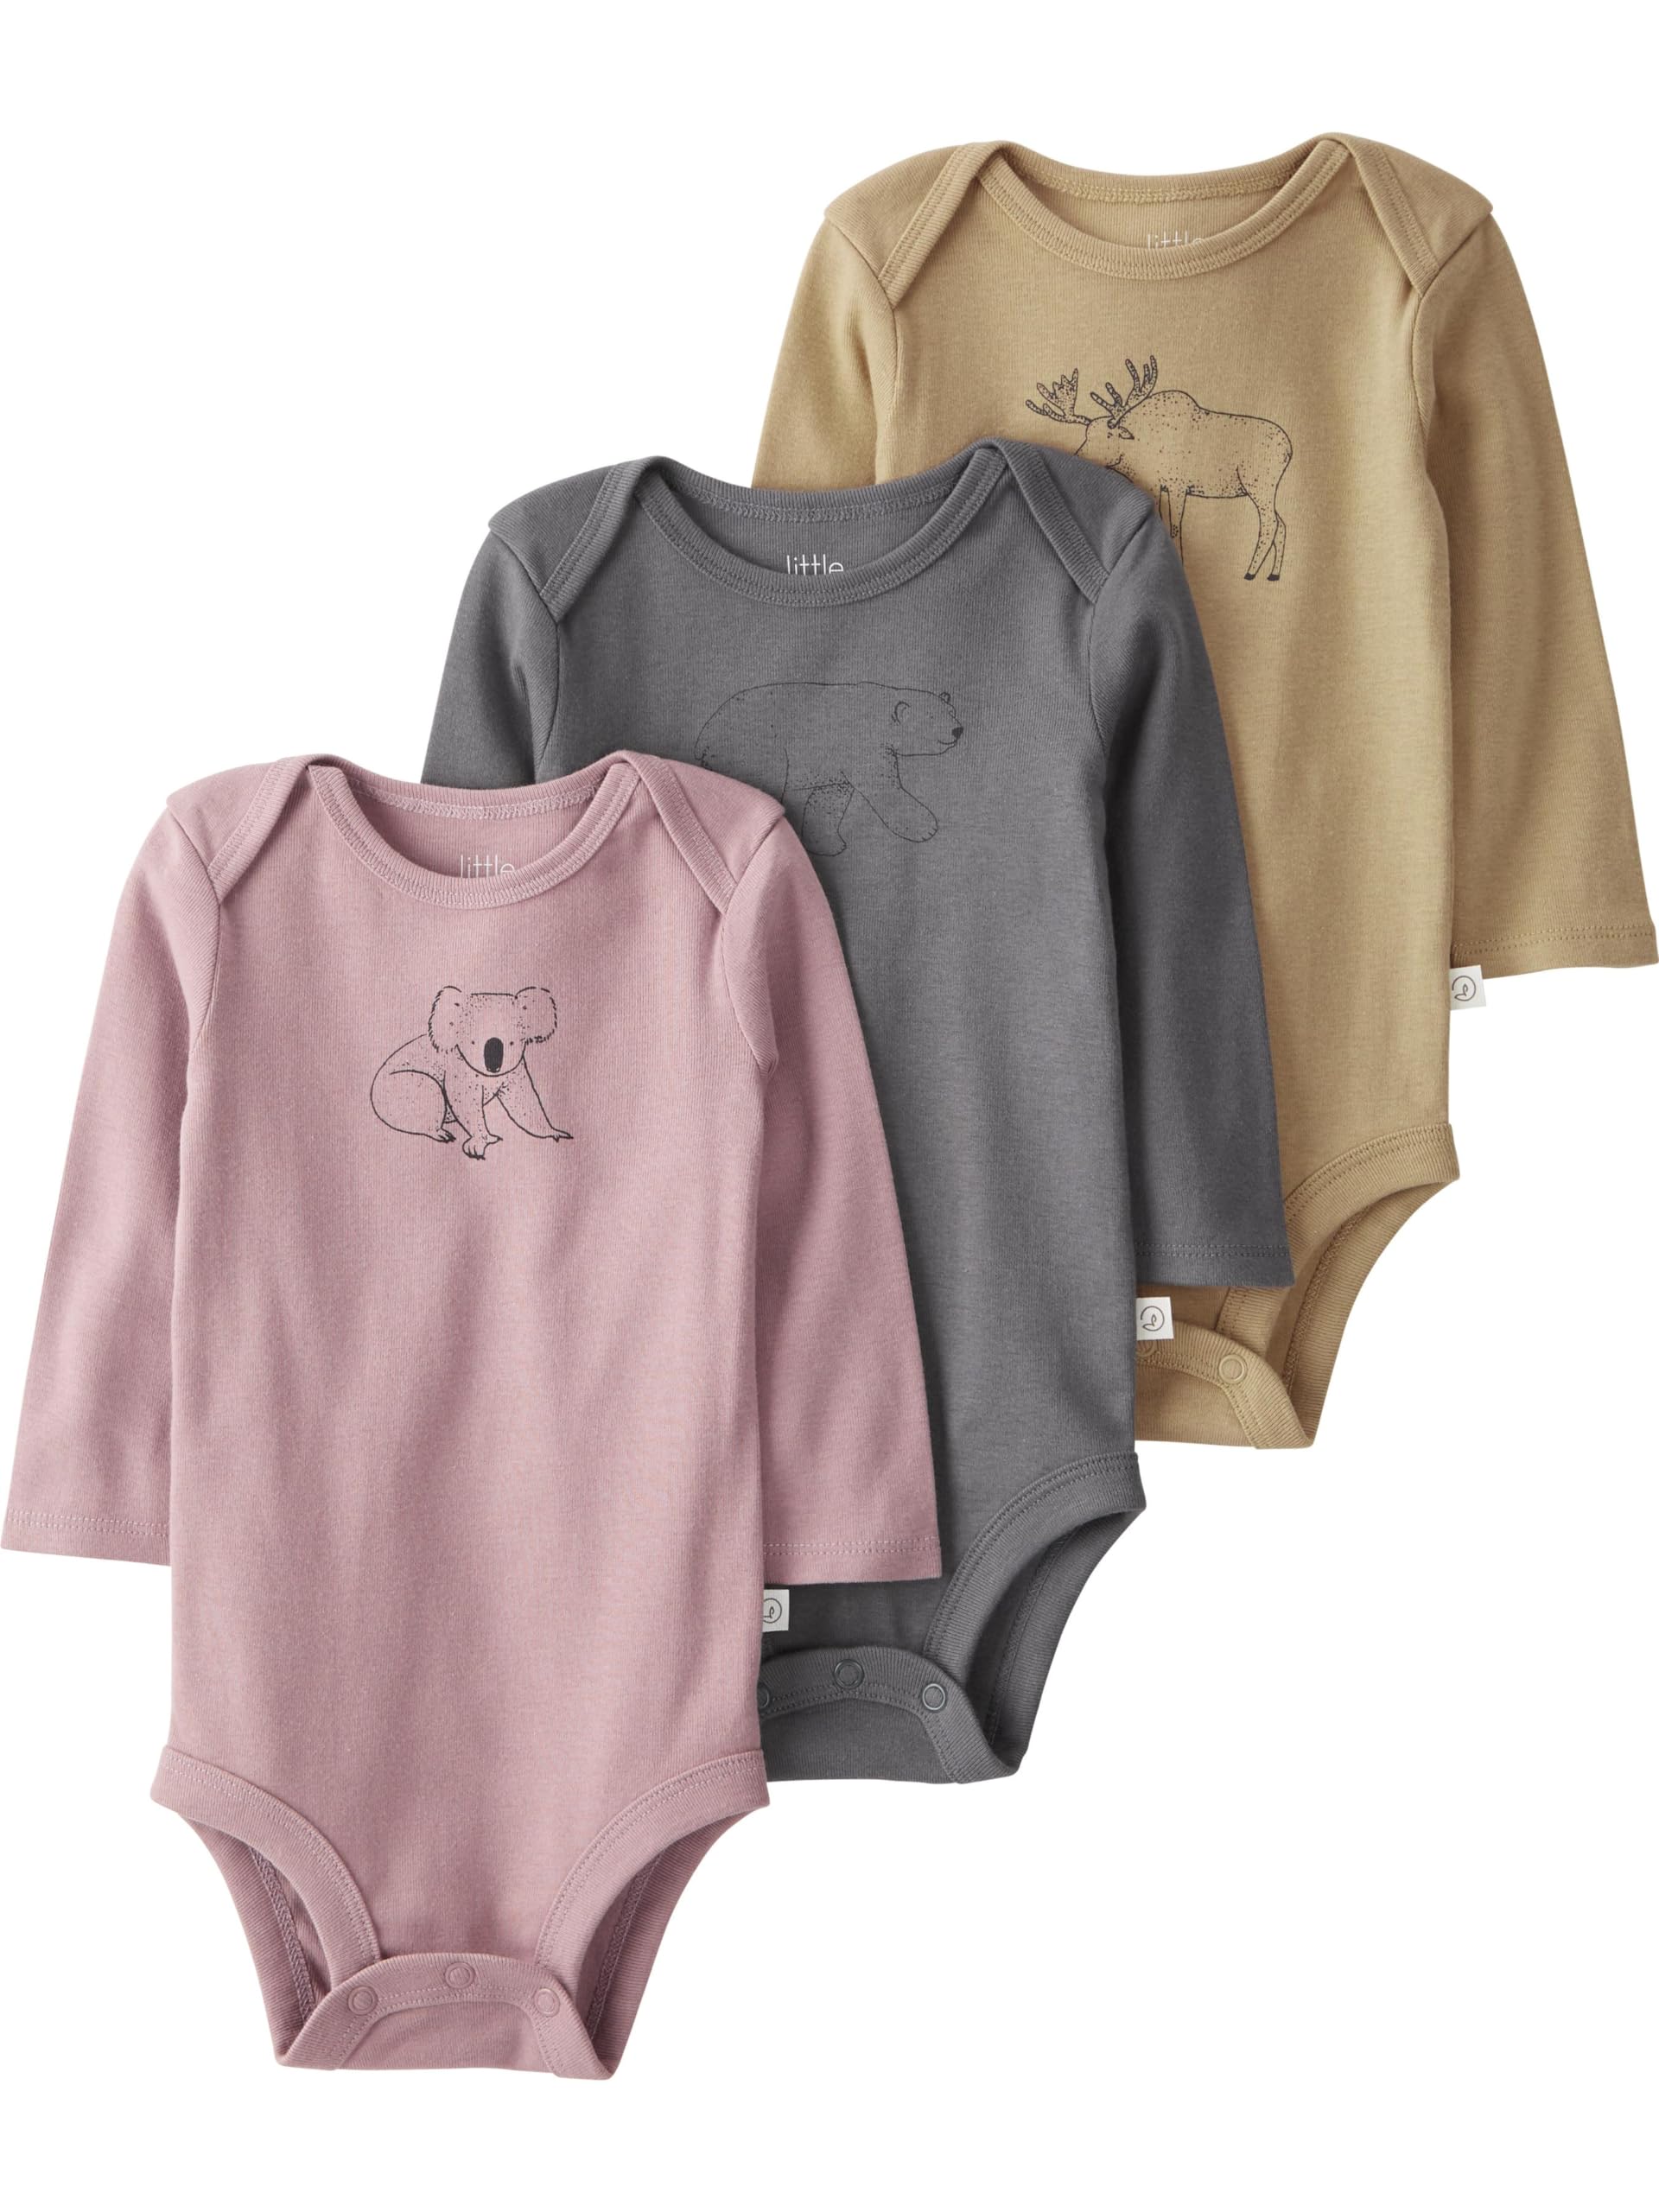 3-Count Carter's Baby Boys' or Girls' Little Planet Organic Cotton Long-Sleeve Bodysuits $9.32 ($3.11 Each) + Free Shipping w/ Prime or on $35+